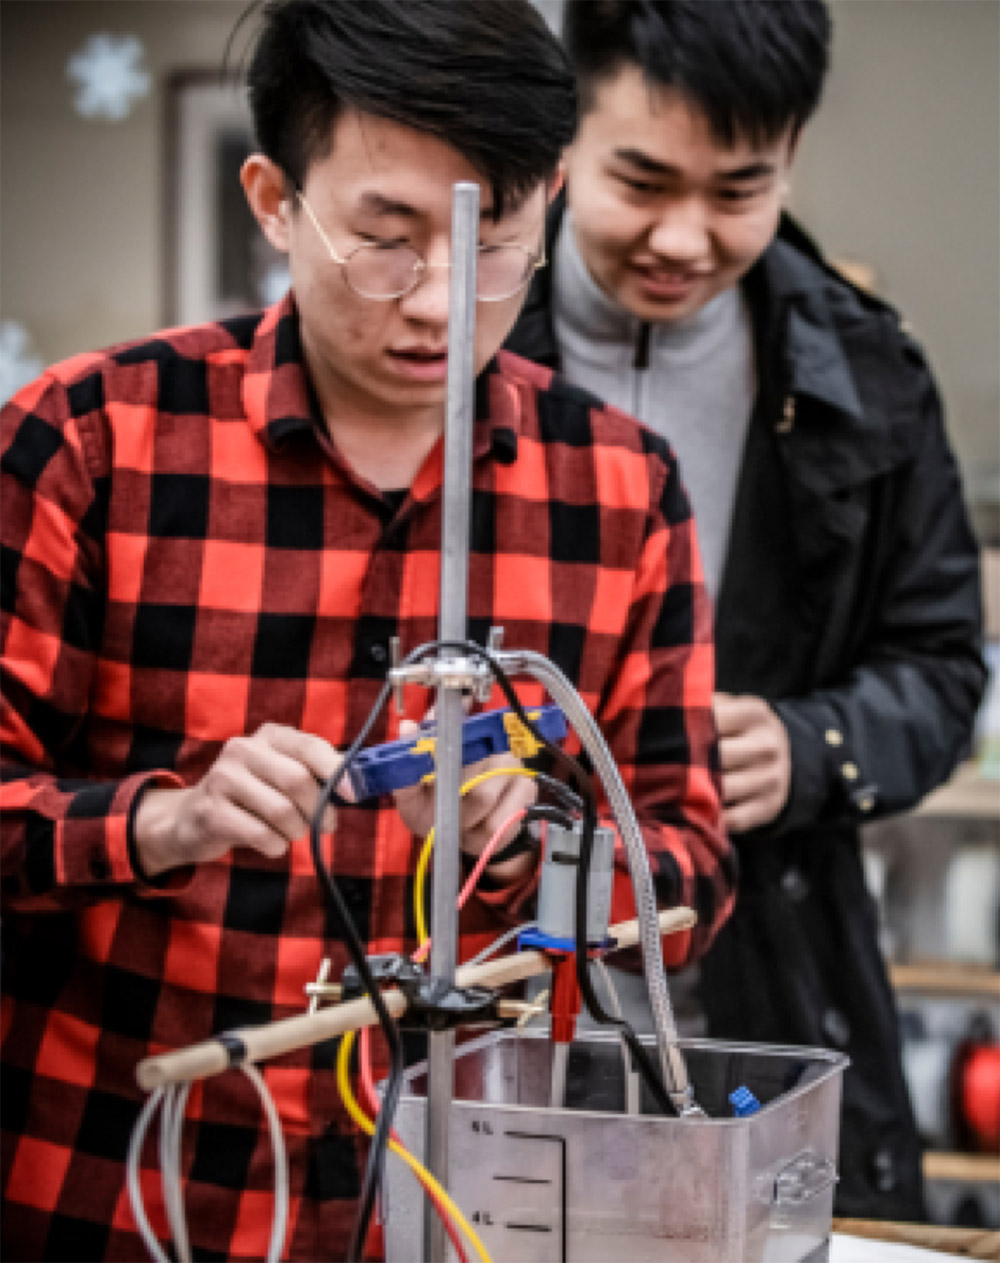 SMU students in an engineering lab.